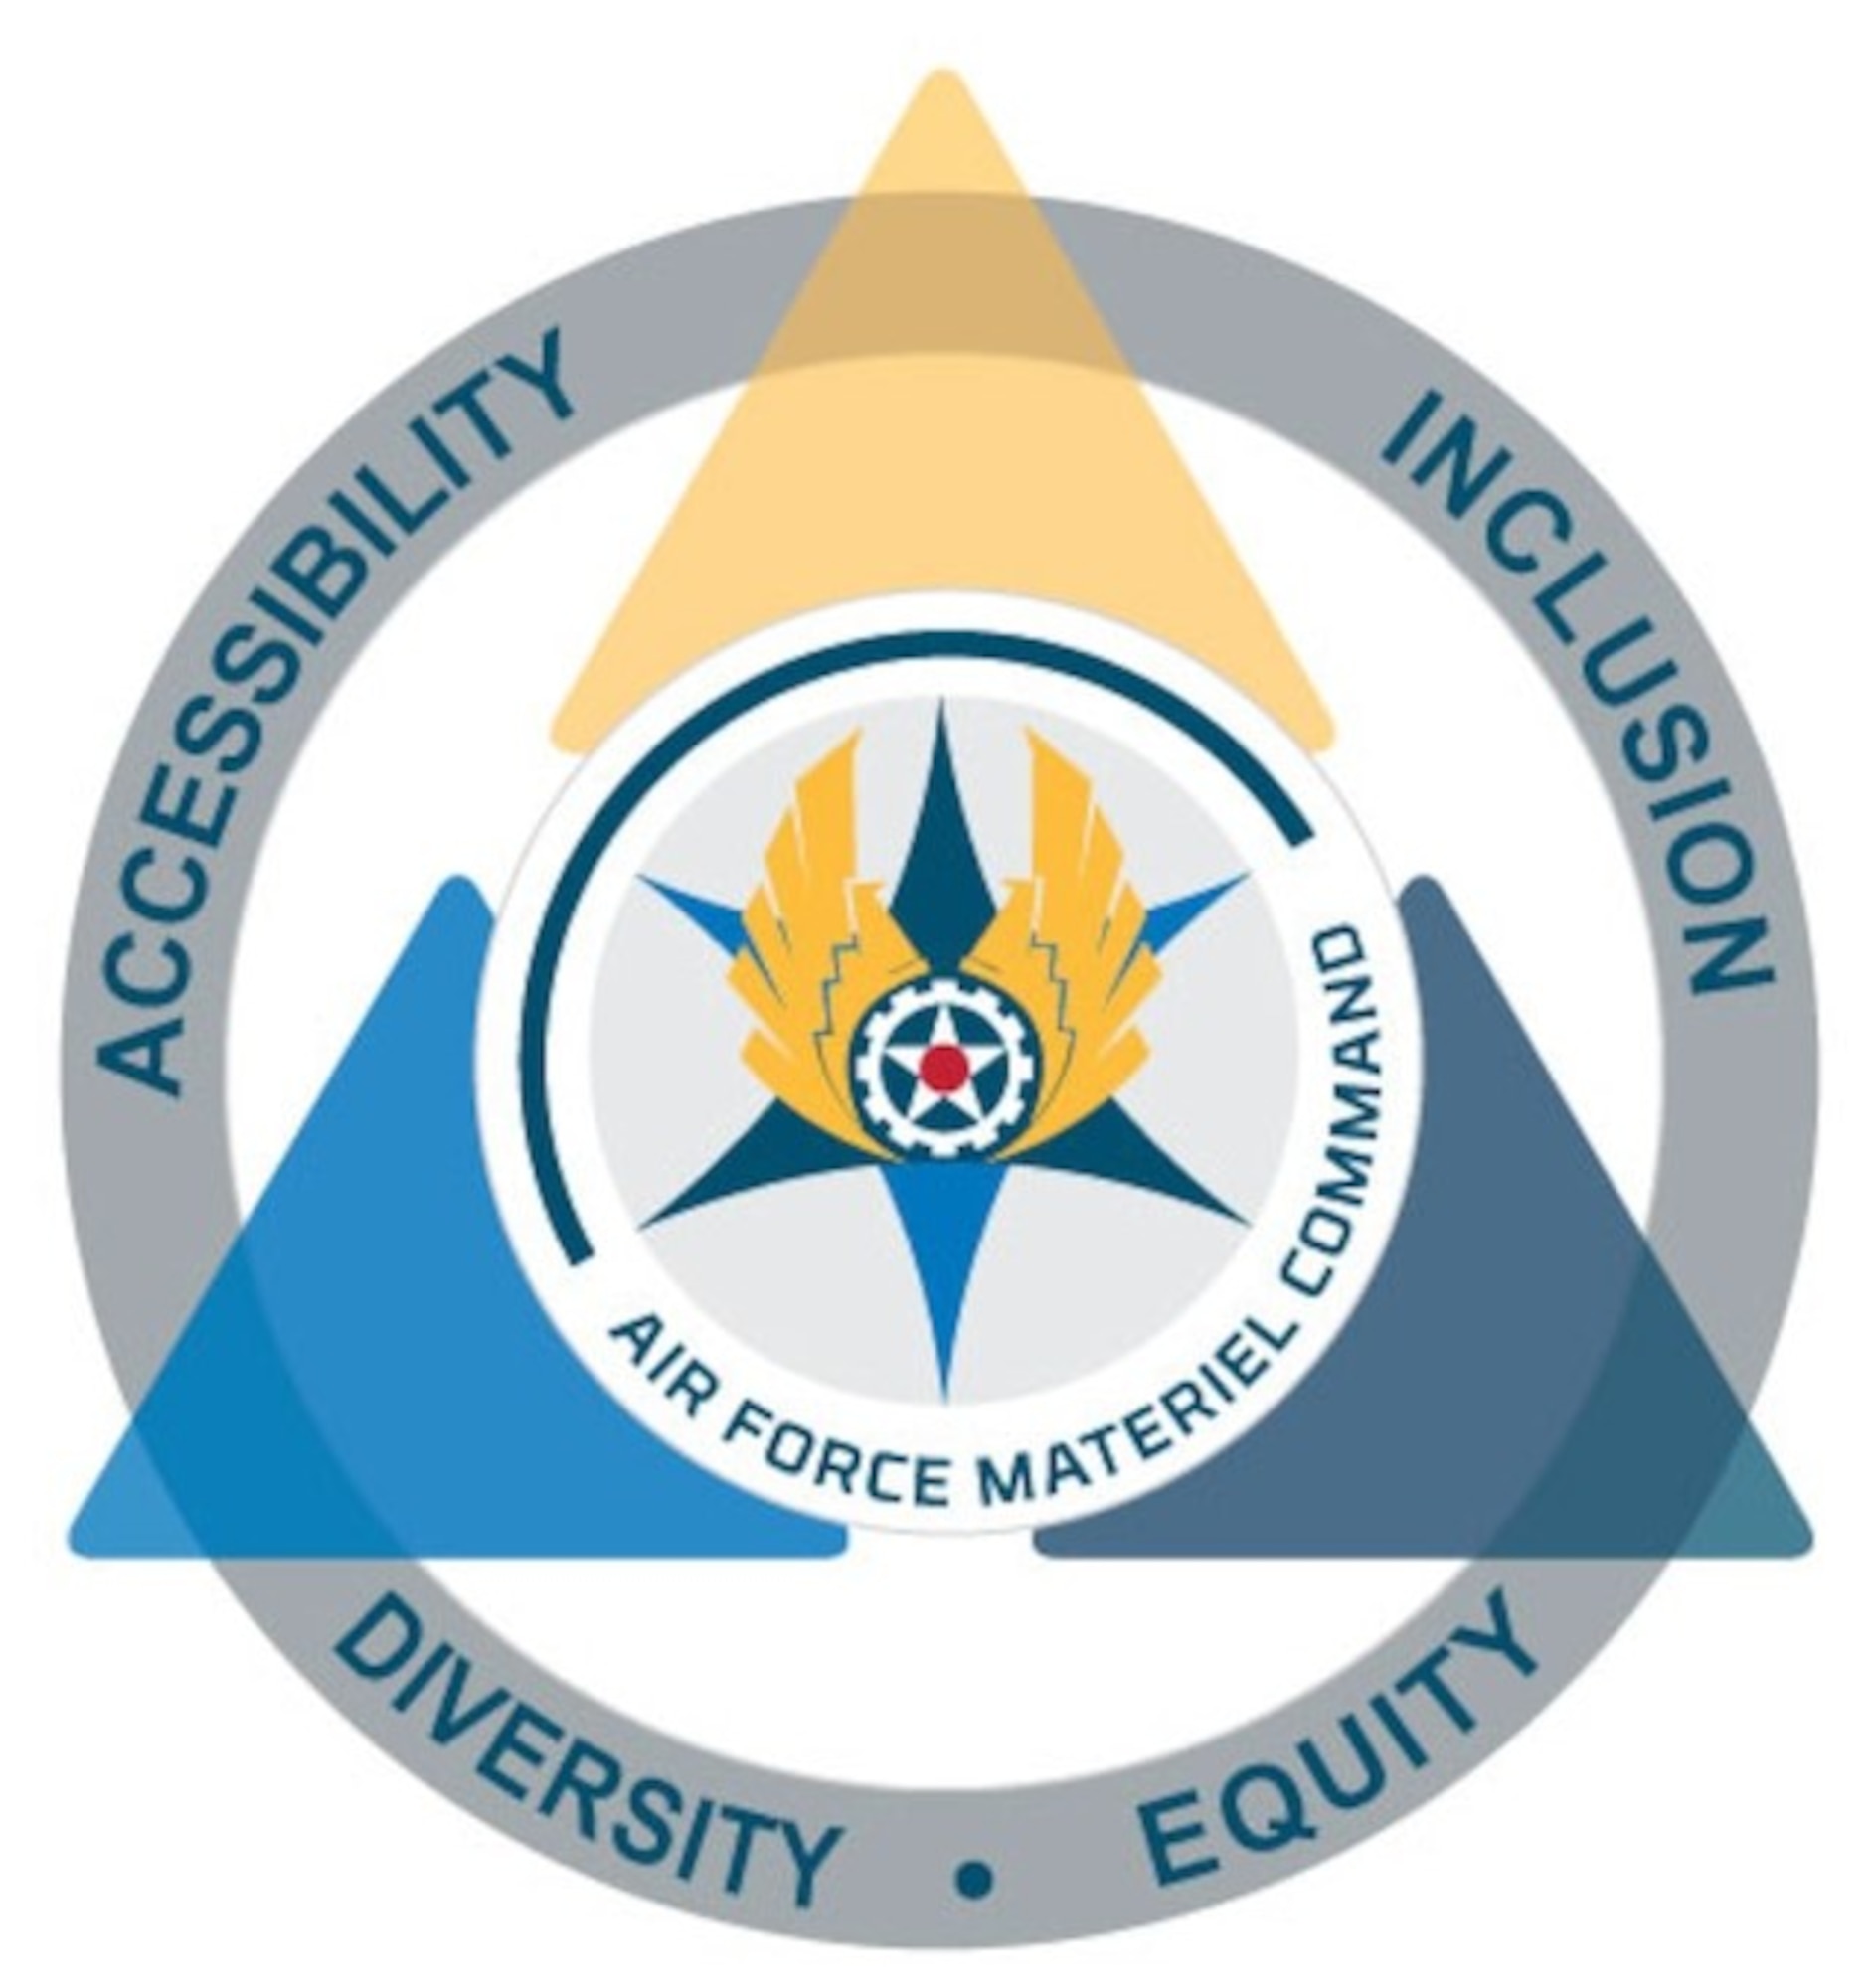 Graphic shows the logo for the Diversity, Equity, Inclusion and Accessibility Office with the words in a circle around a triangle with the AFMC logo.